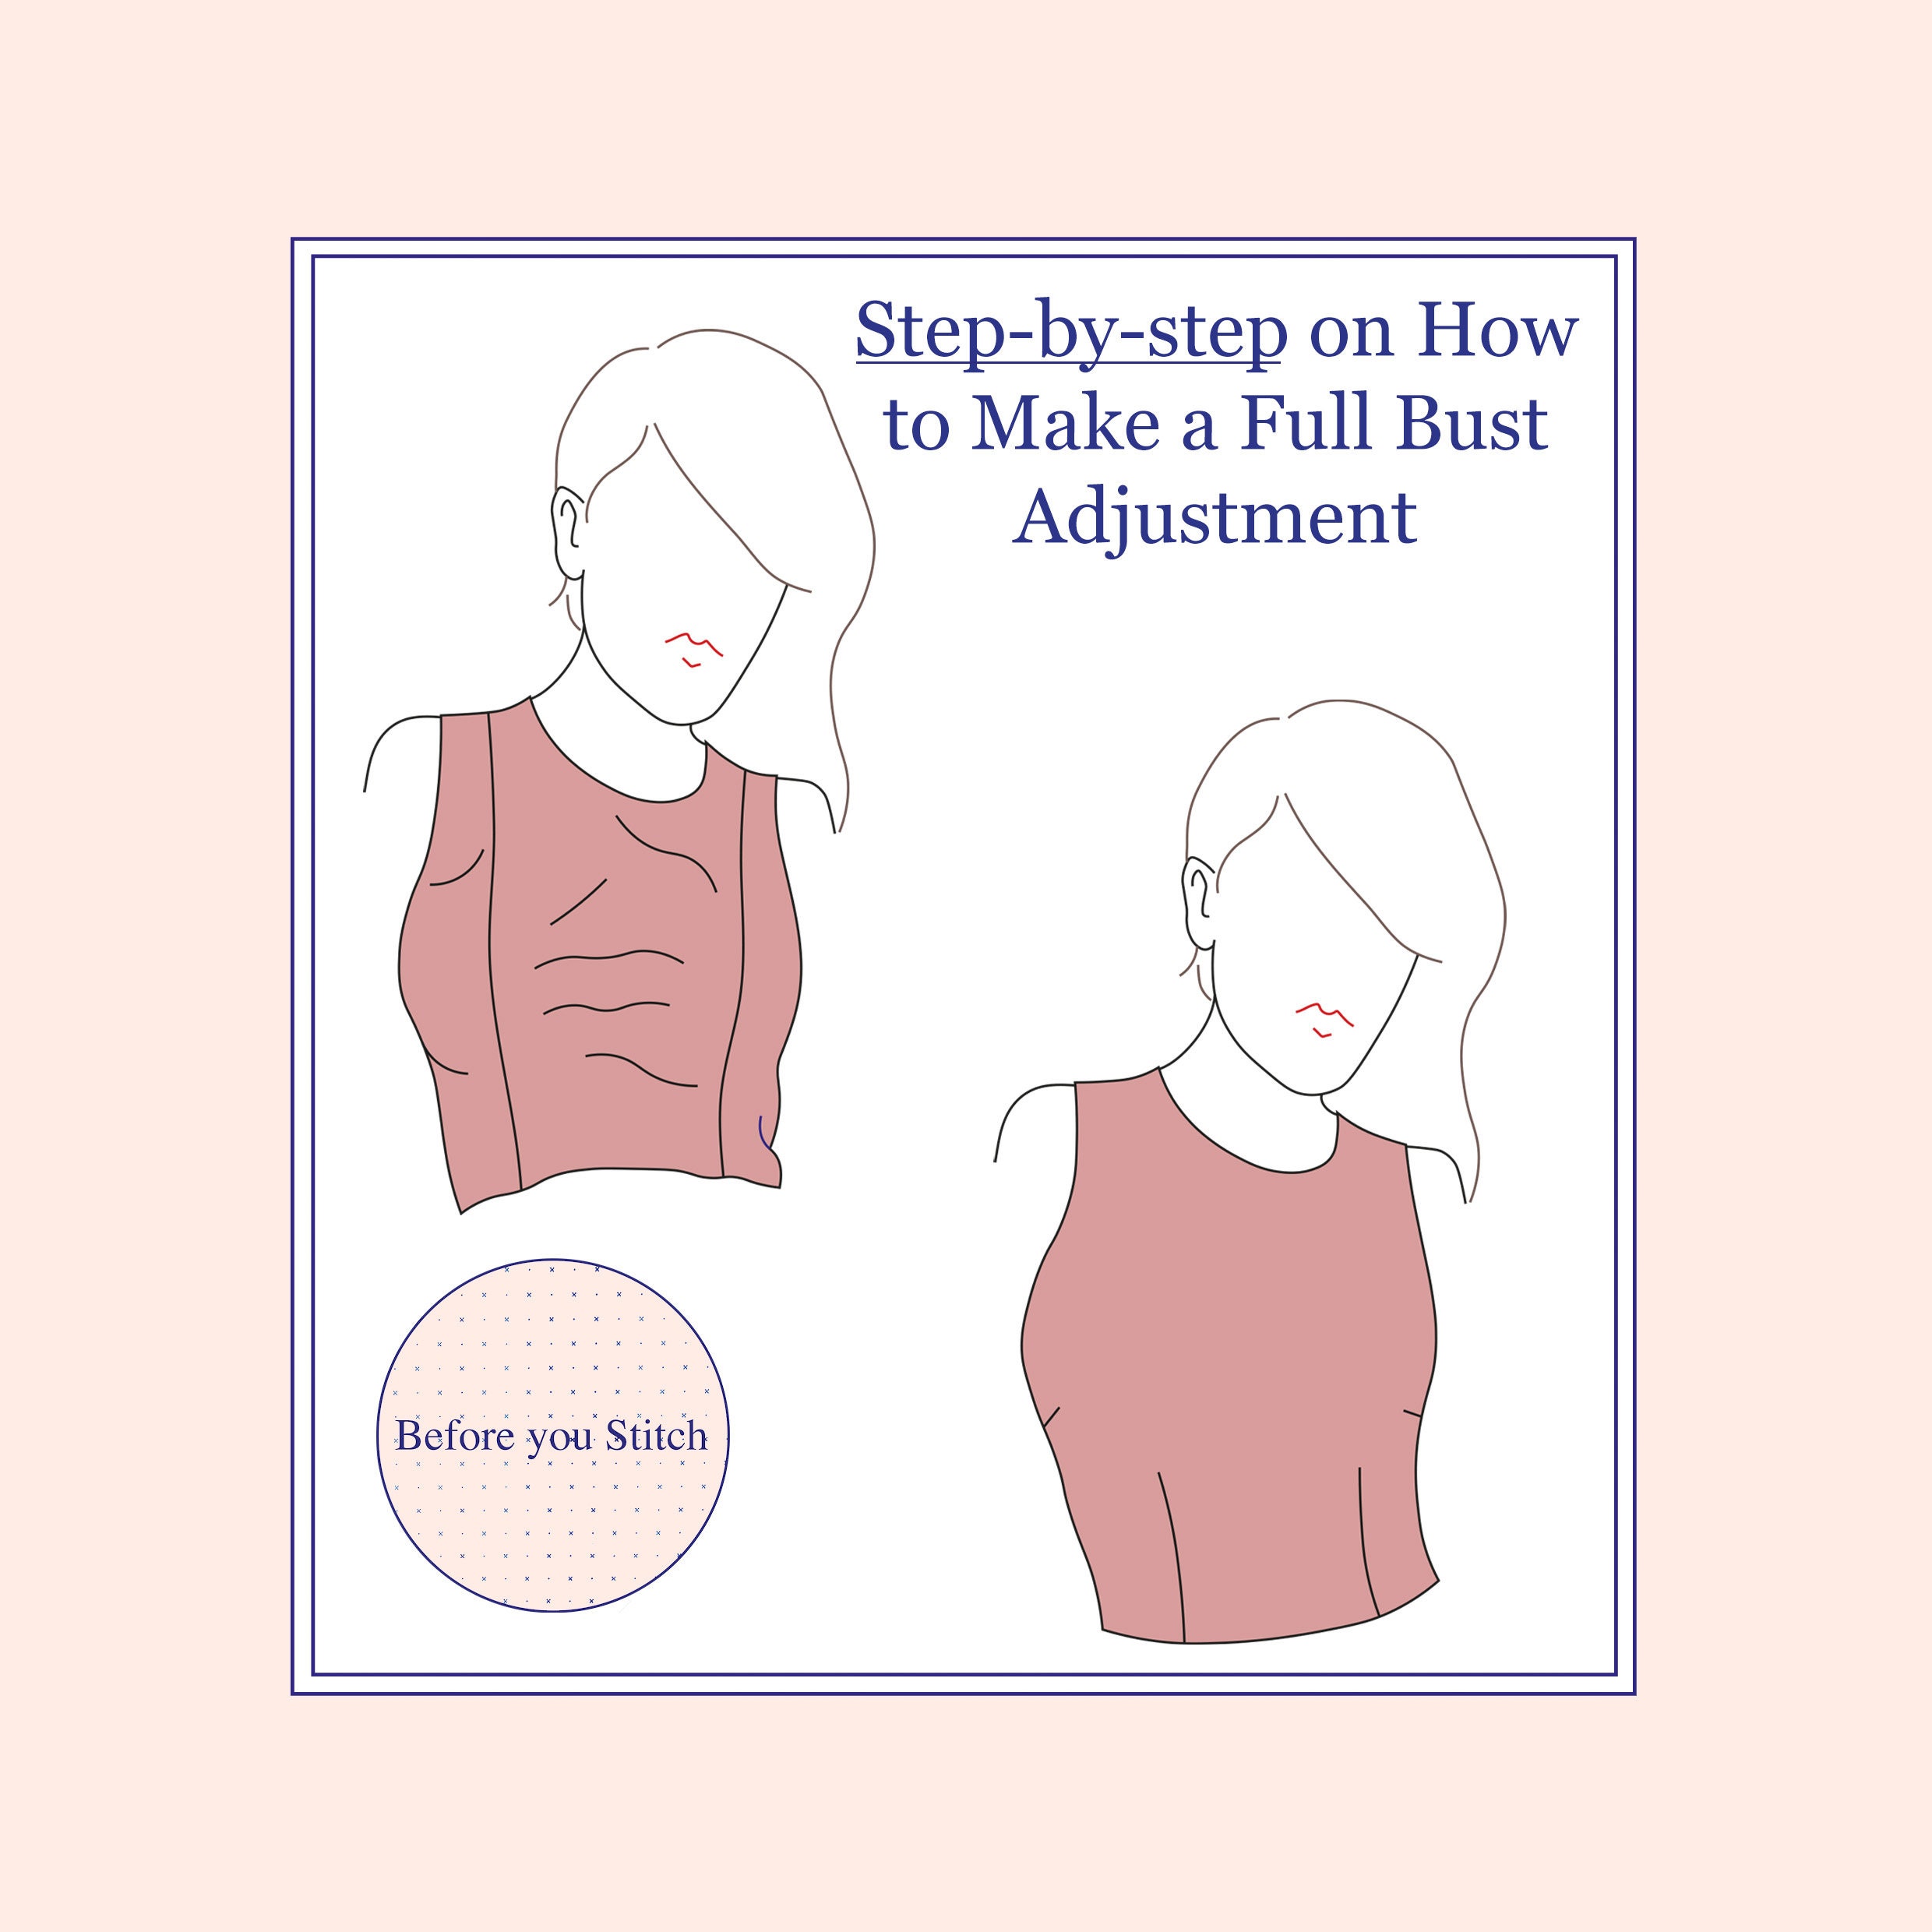 Step-by-step on How to Make a Full Bust Adjustment 